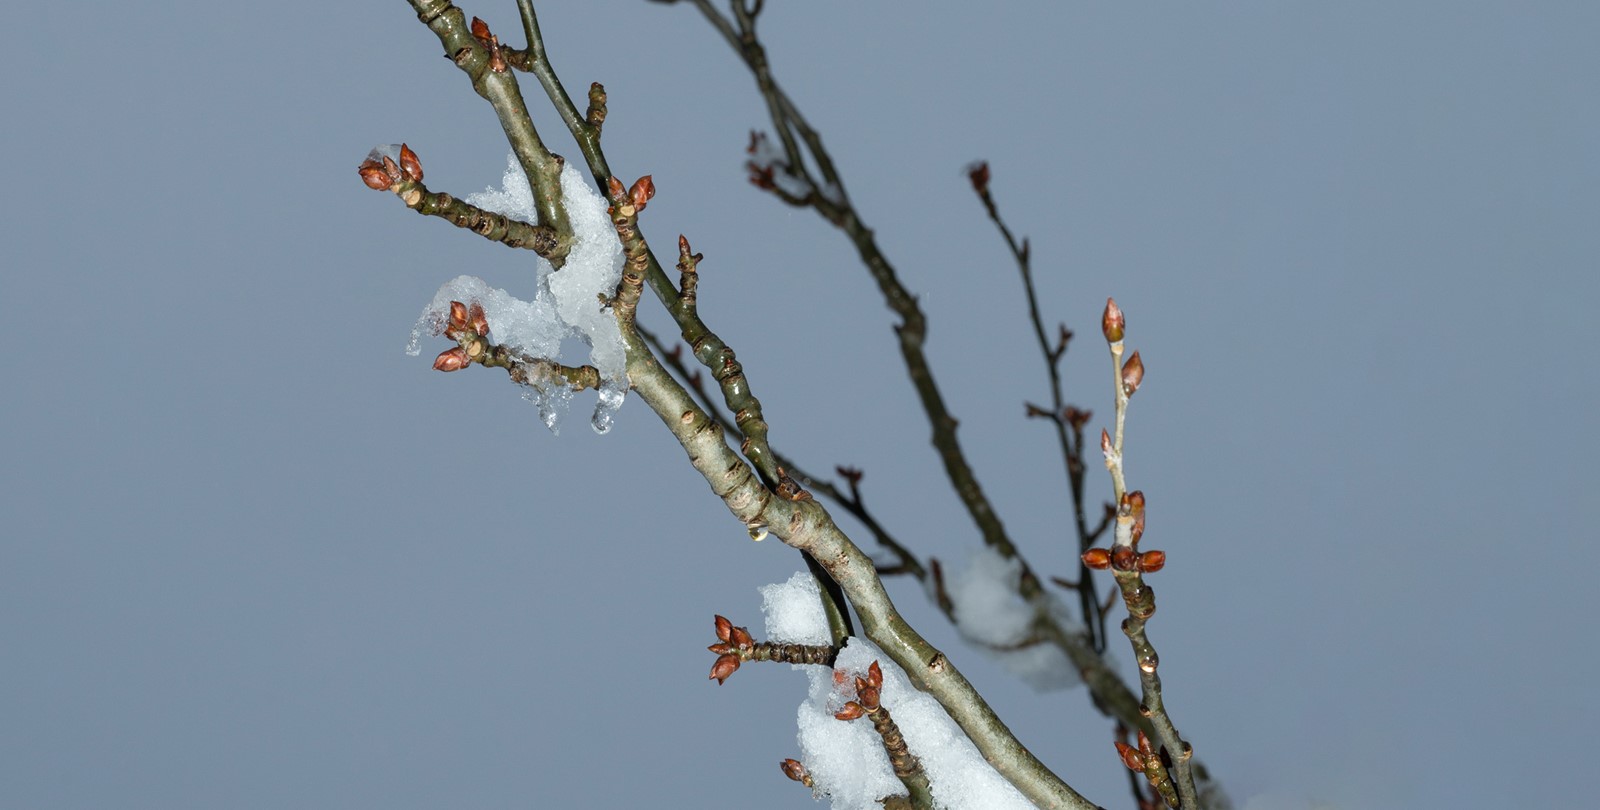 Small clumps of snow caught between buds on tree branch against a deep grey blue sky